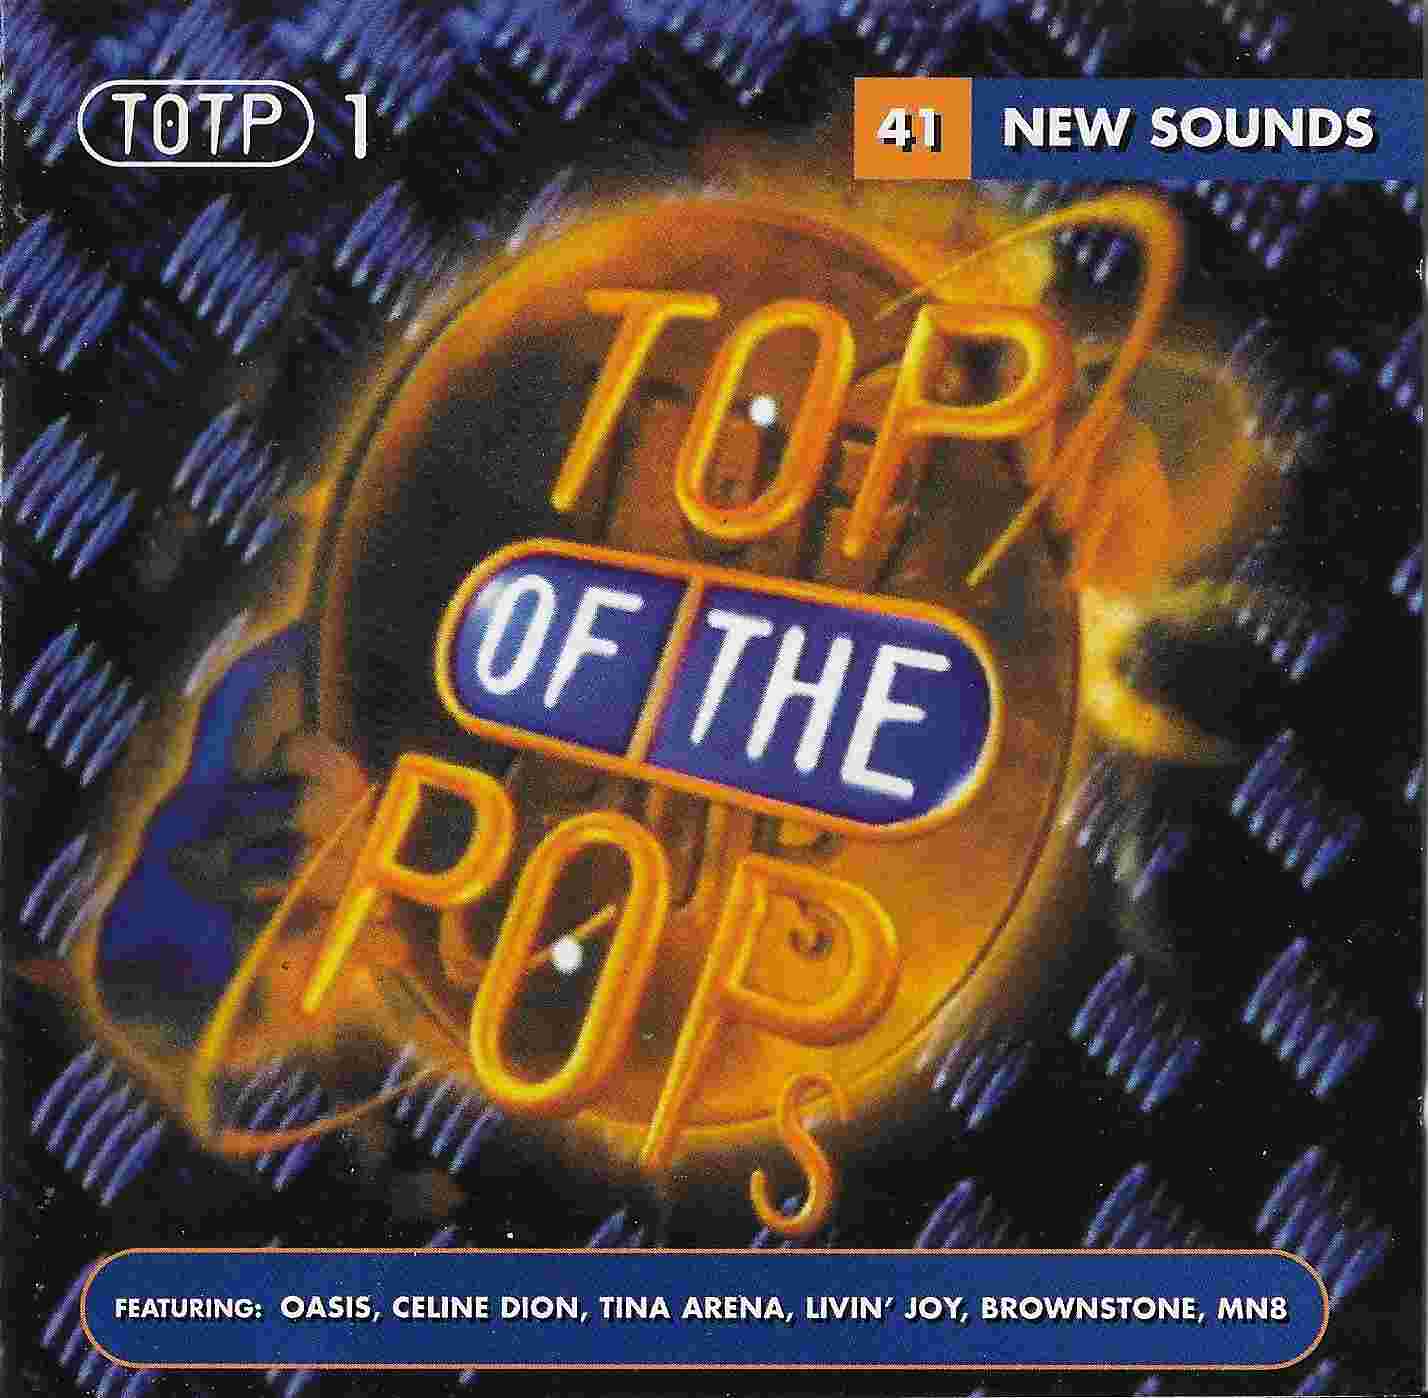 Picture of MOODCD 40 Top of the pops 1 by artist Various 